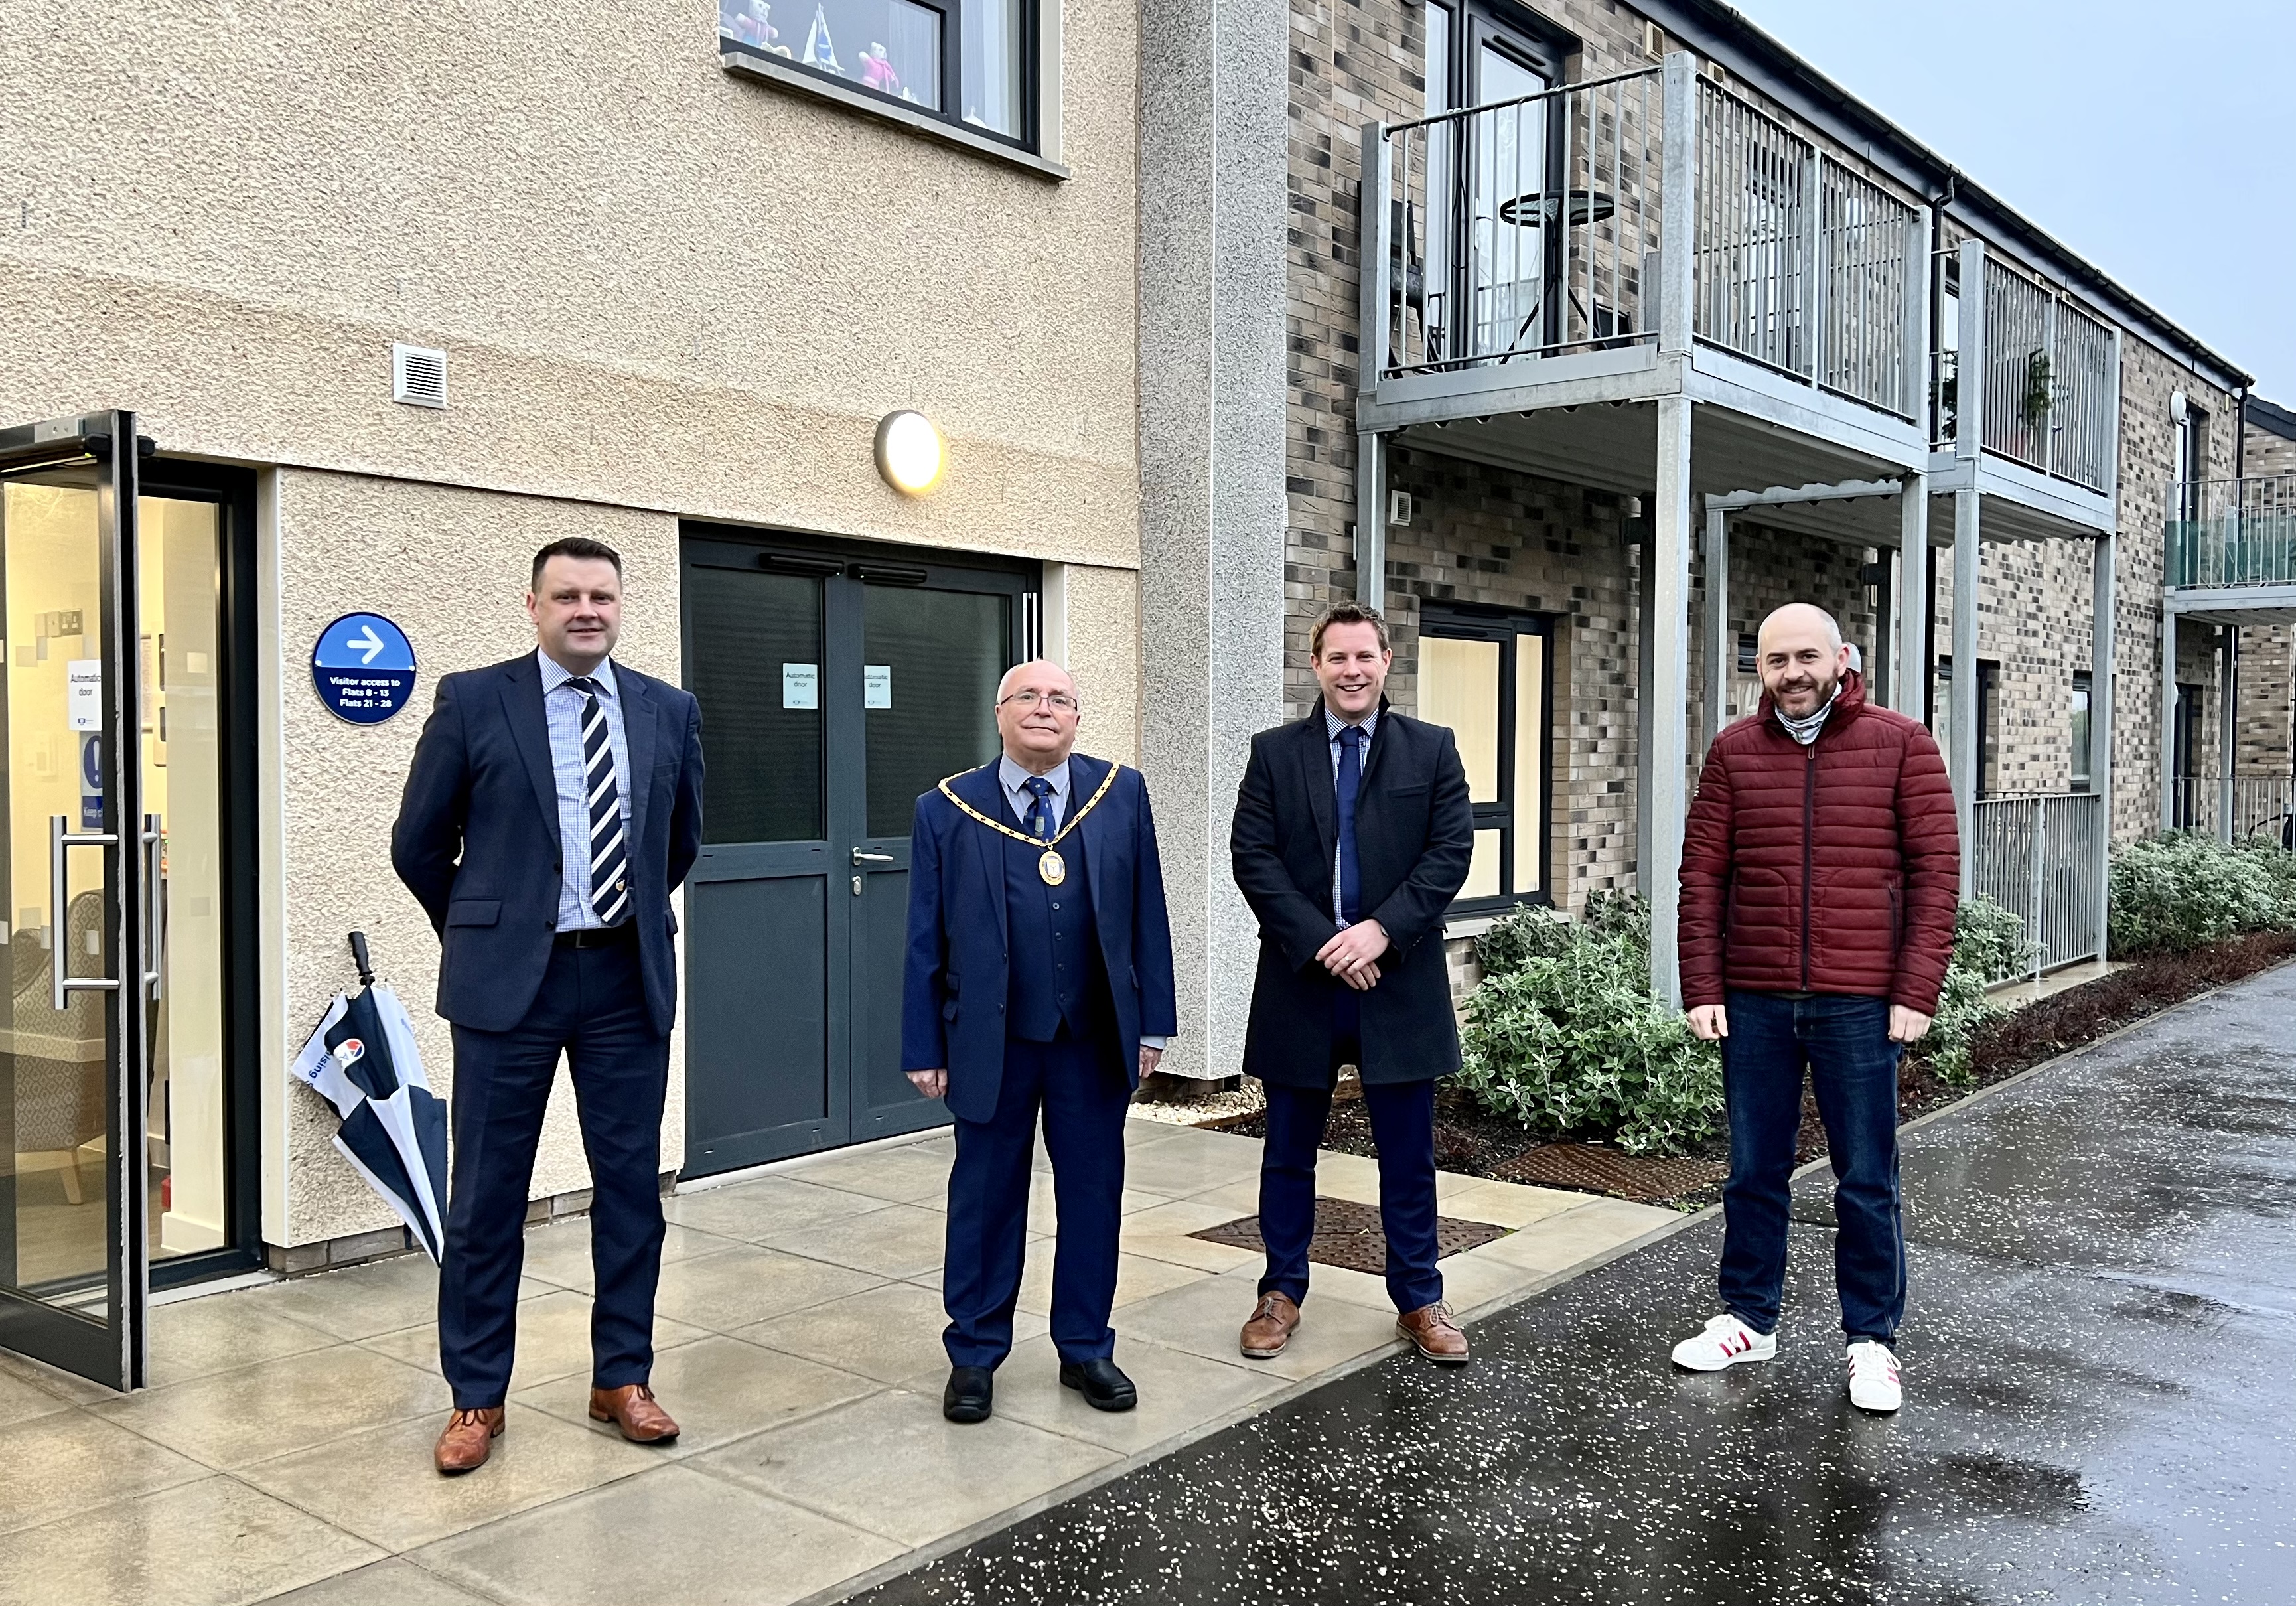 North Ayrshire’s largest council housing development officially opens